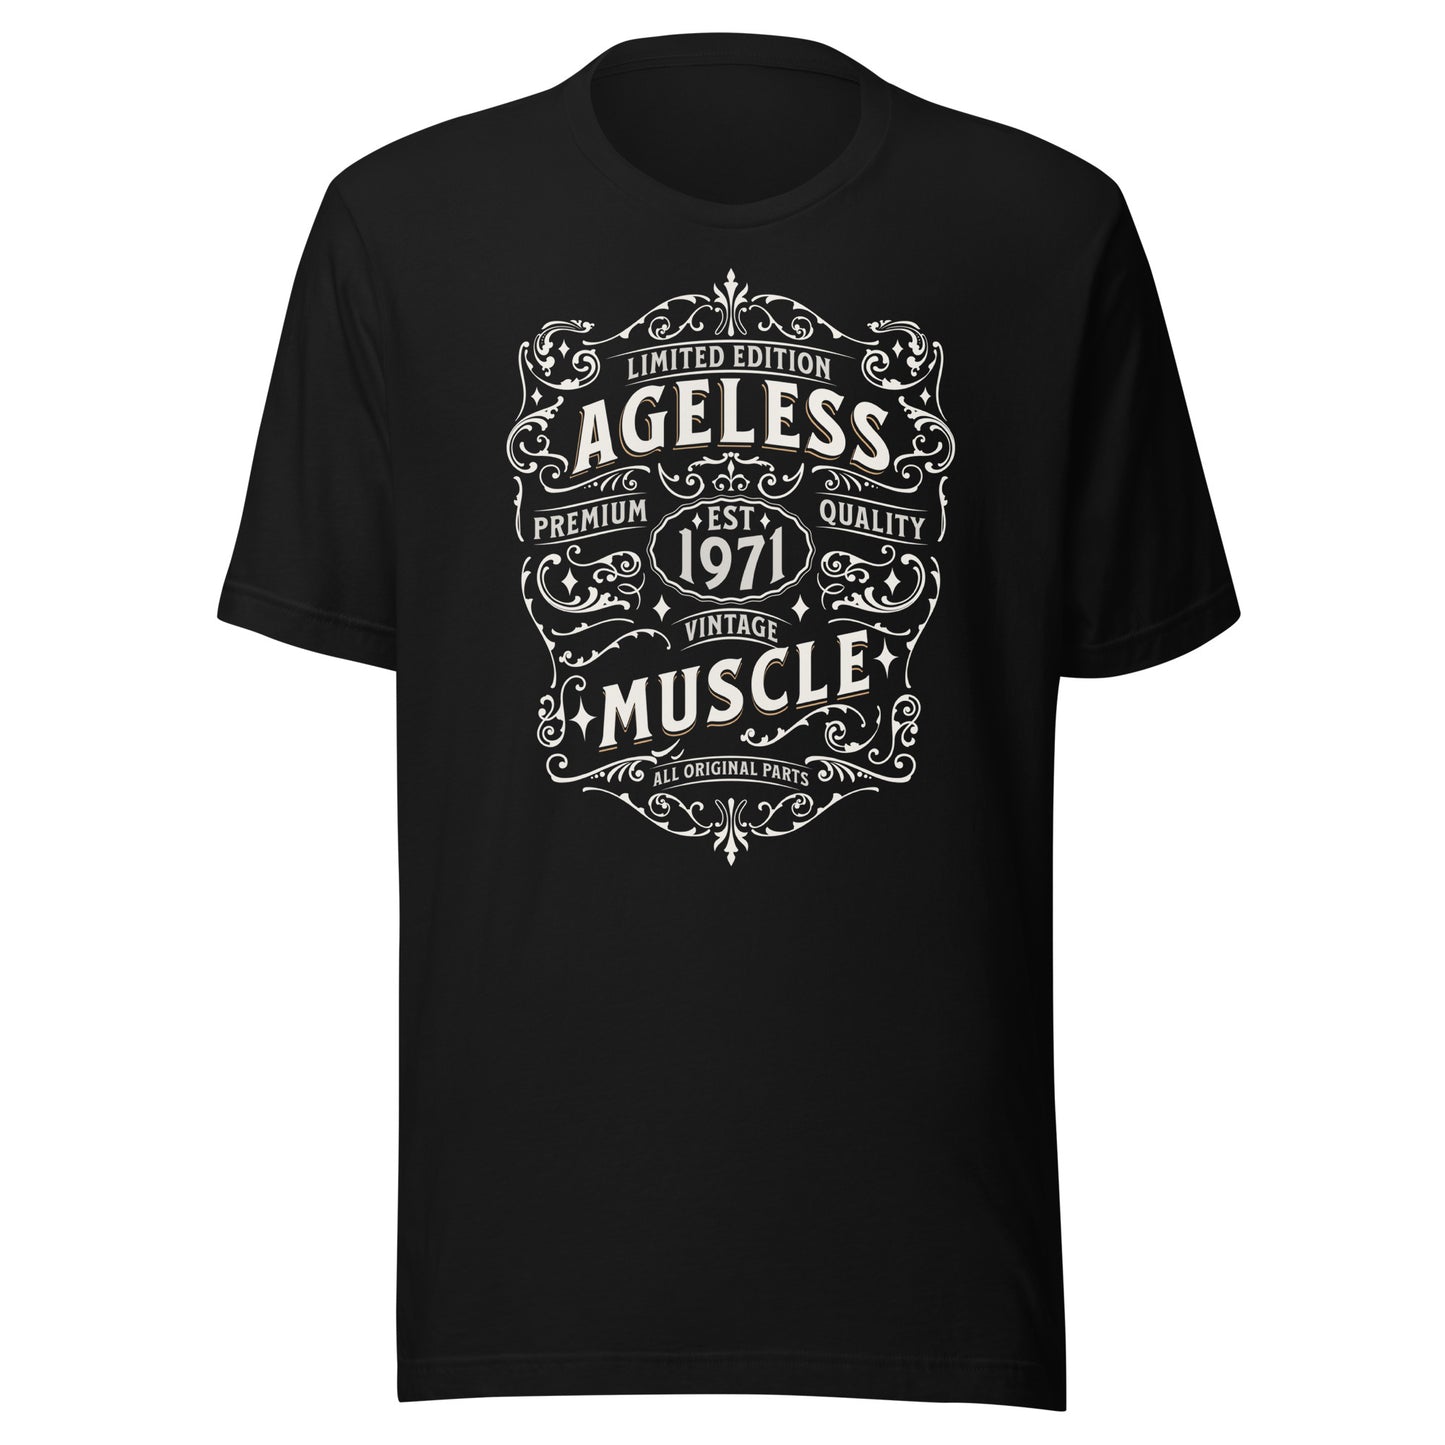 Ageless Muscle 1971: Limited Edition Unisex t-shirt